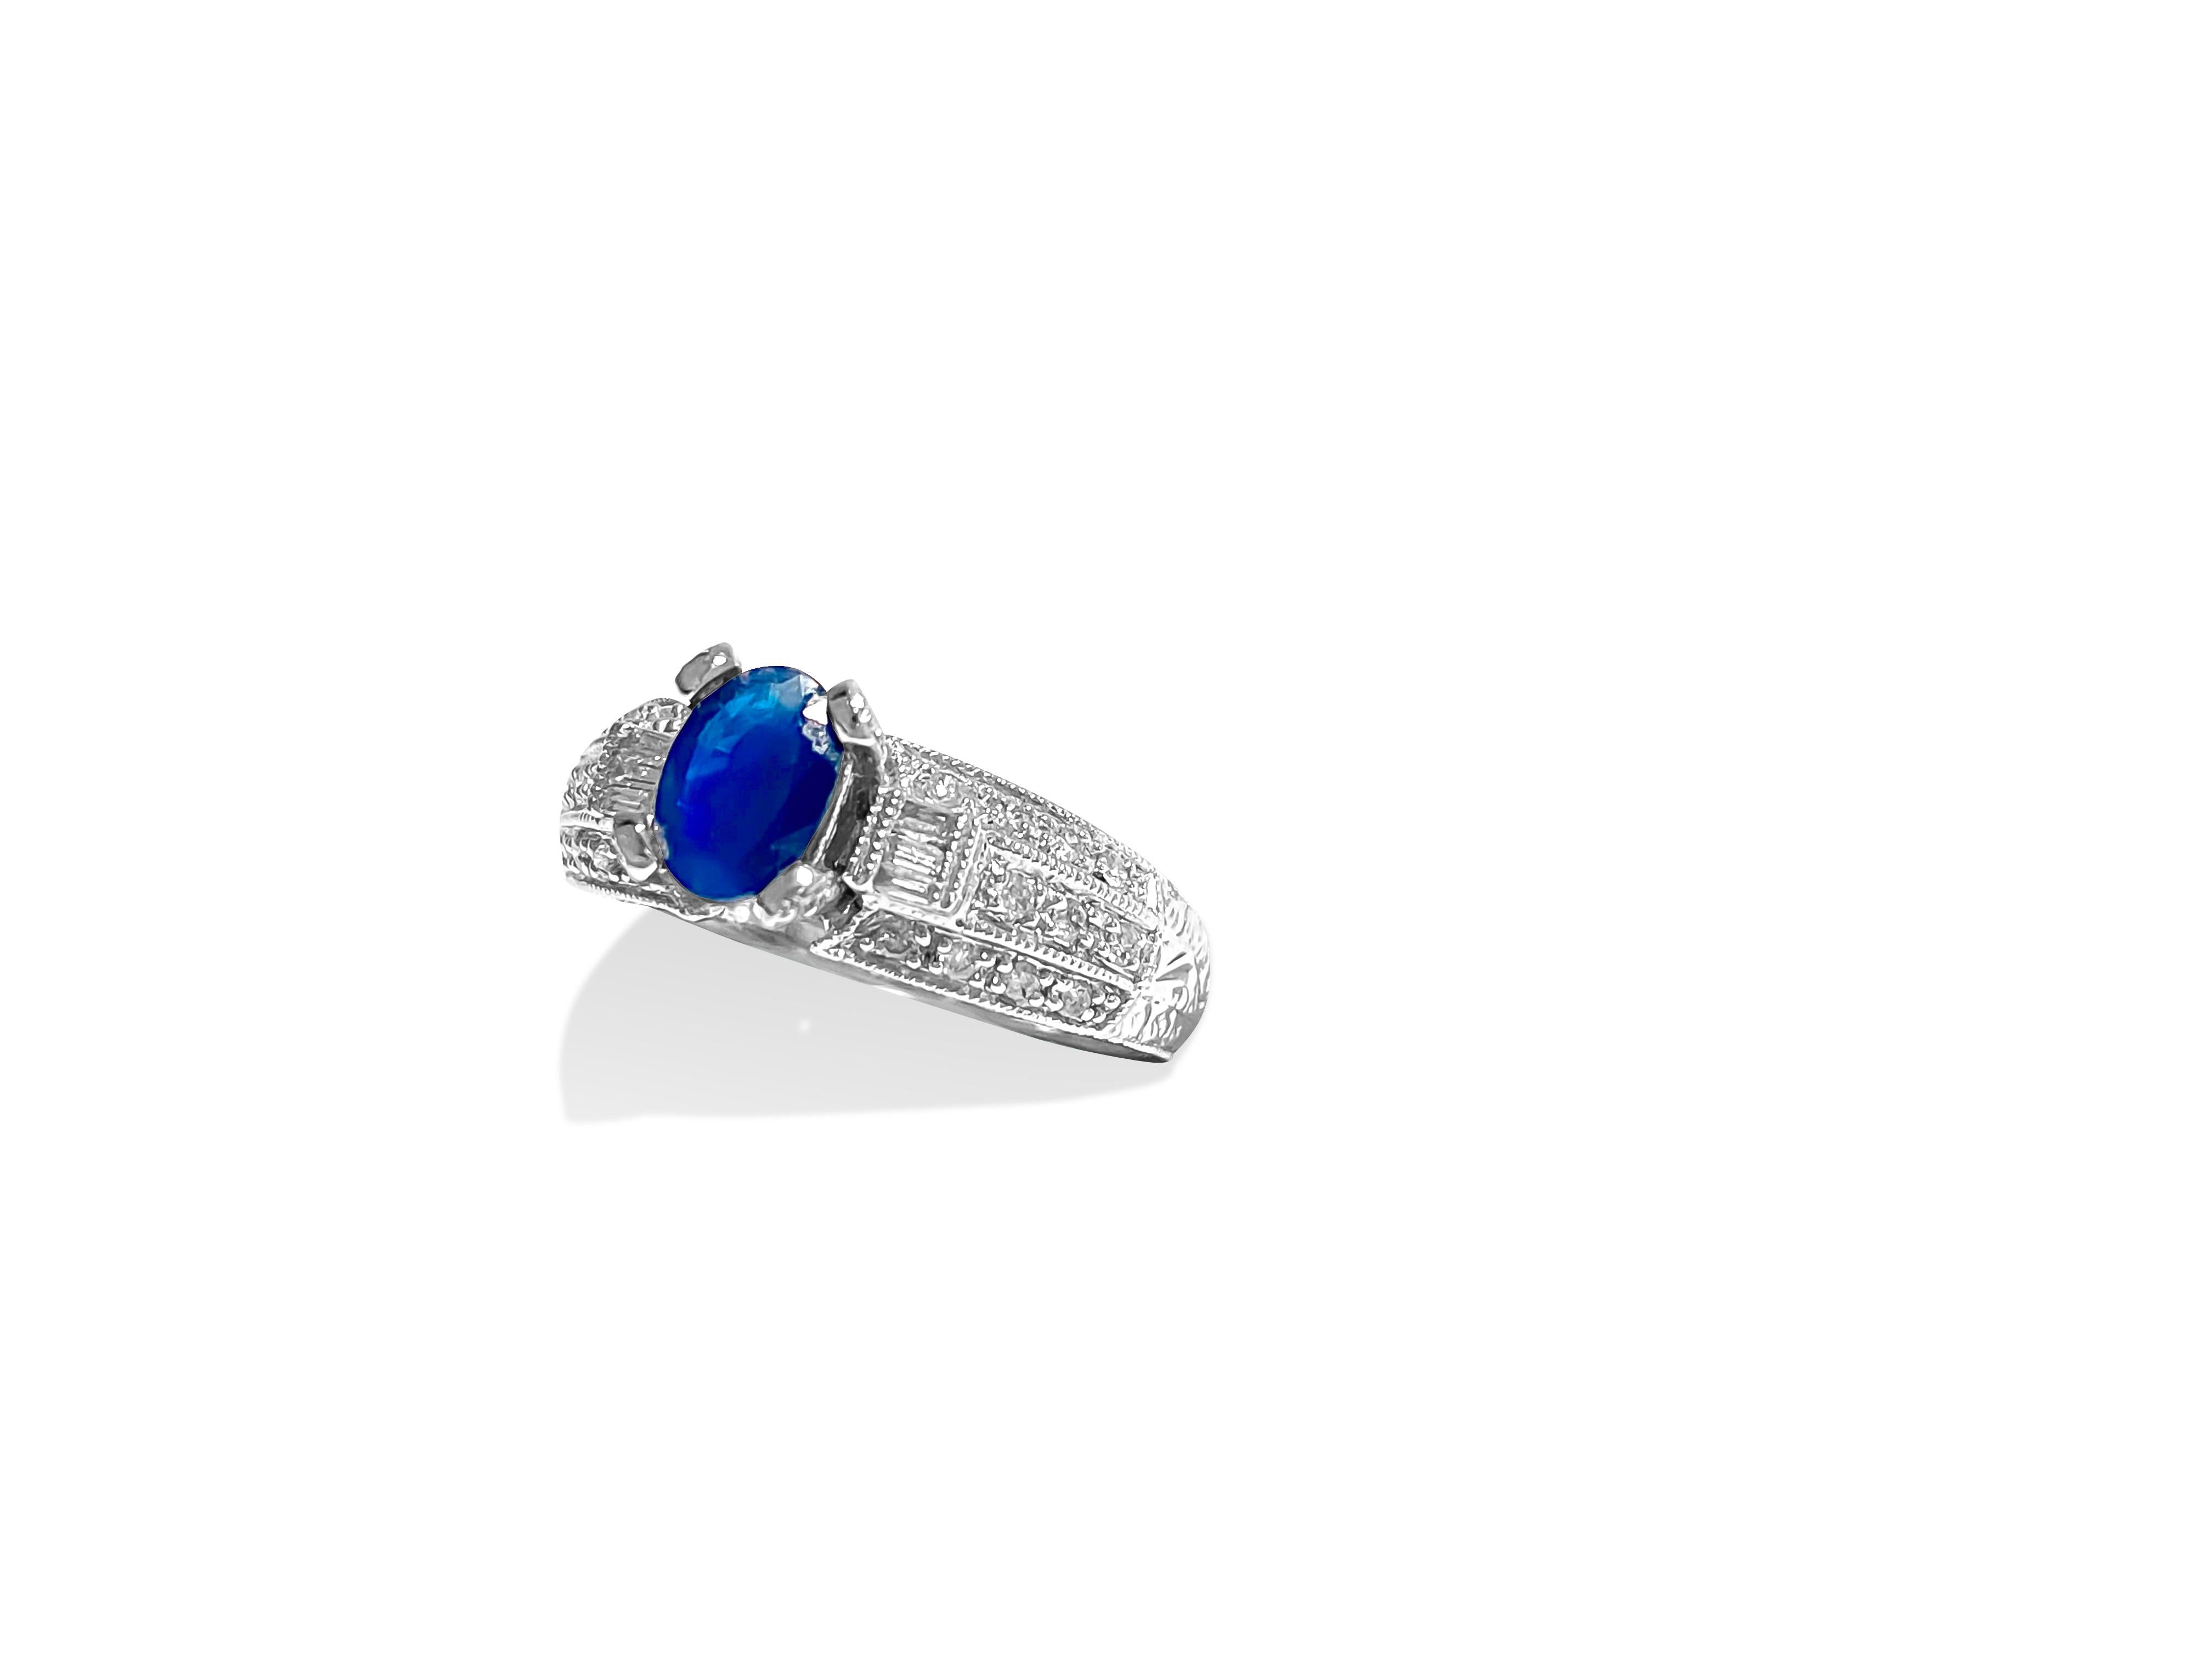 Fashioned from luxurious 18k white gold, this stunning ring showcases a captivating oval-shaped blue sapphire weighing 1.50 carats at its center, securely set in prongs. The natural earth-mined gem exhibits a deep blue hue, radiating elegance and